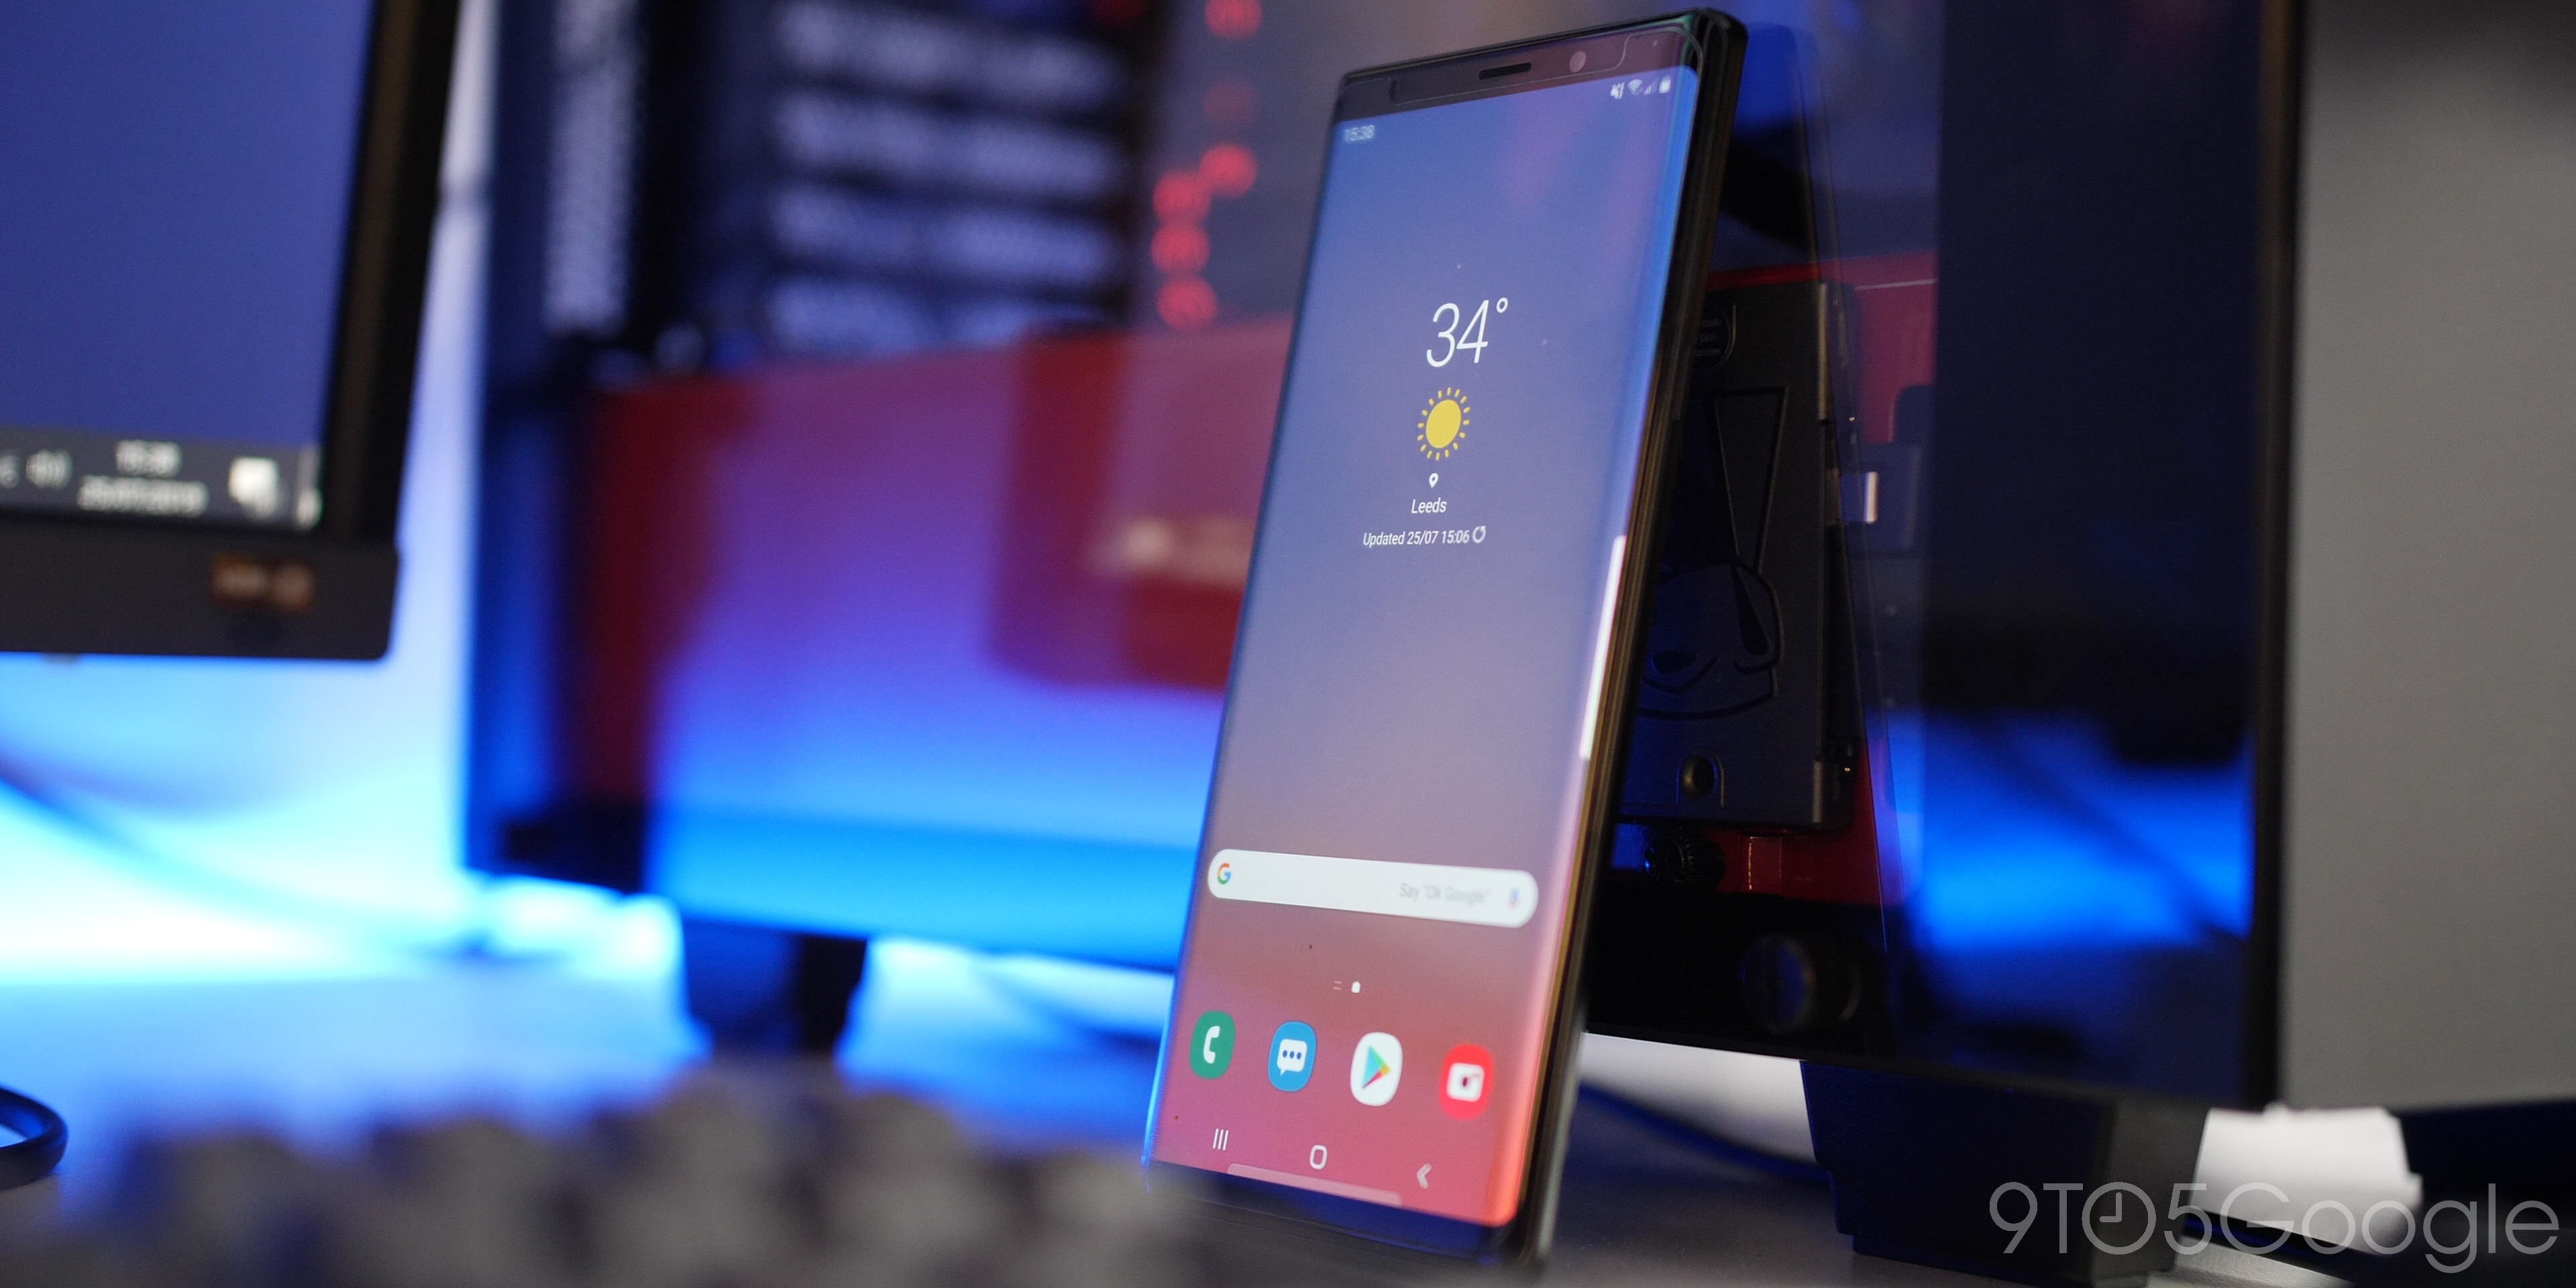 Samsung Galaxy Note 9 Review: The Best Big-Screen Phone